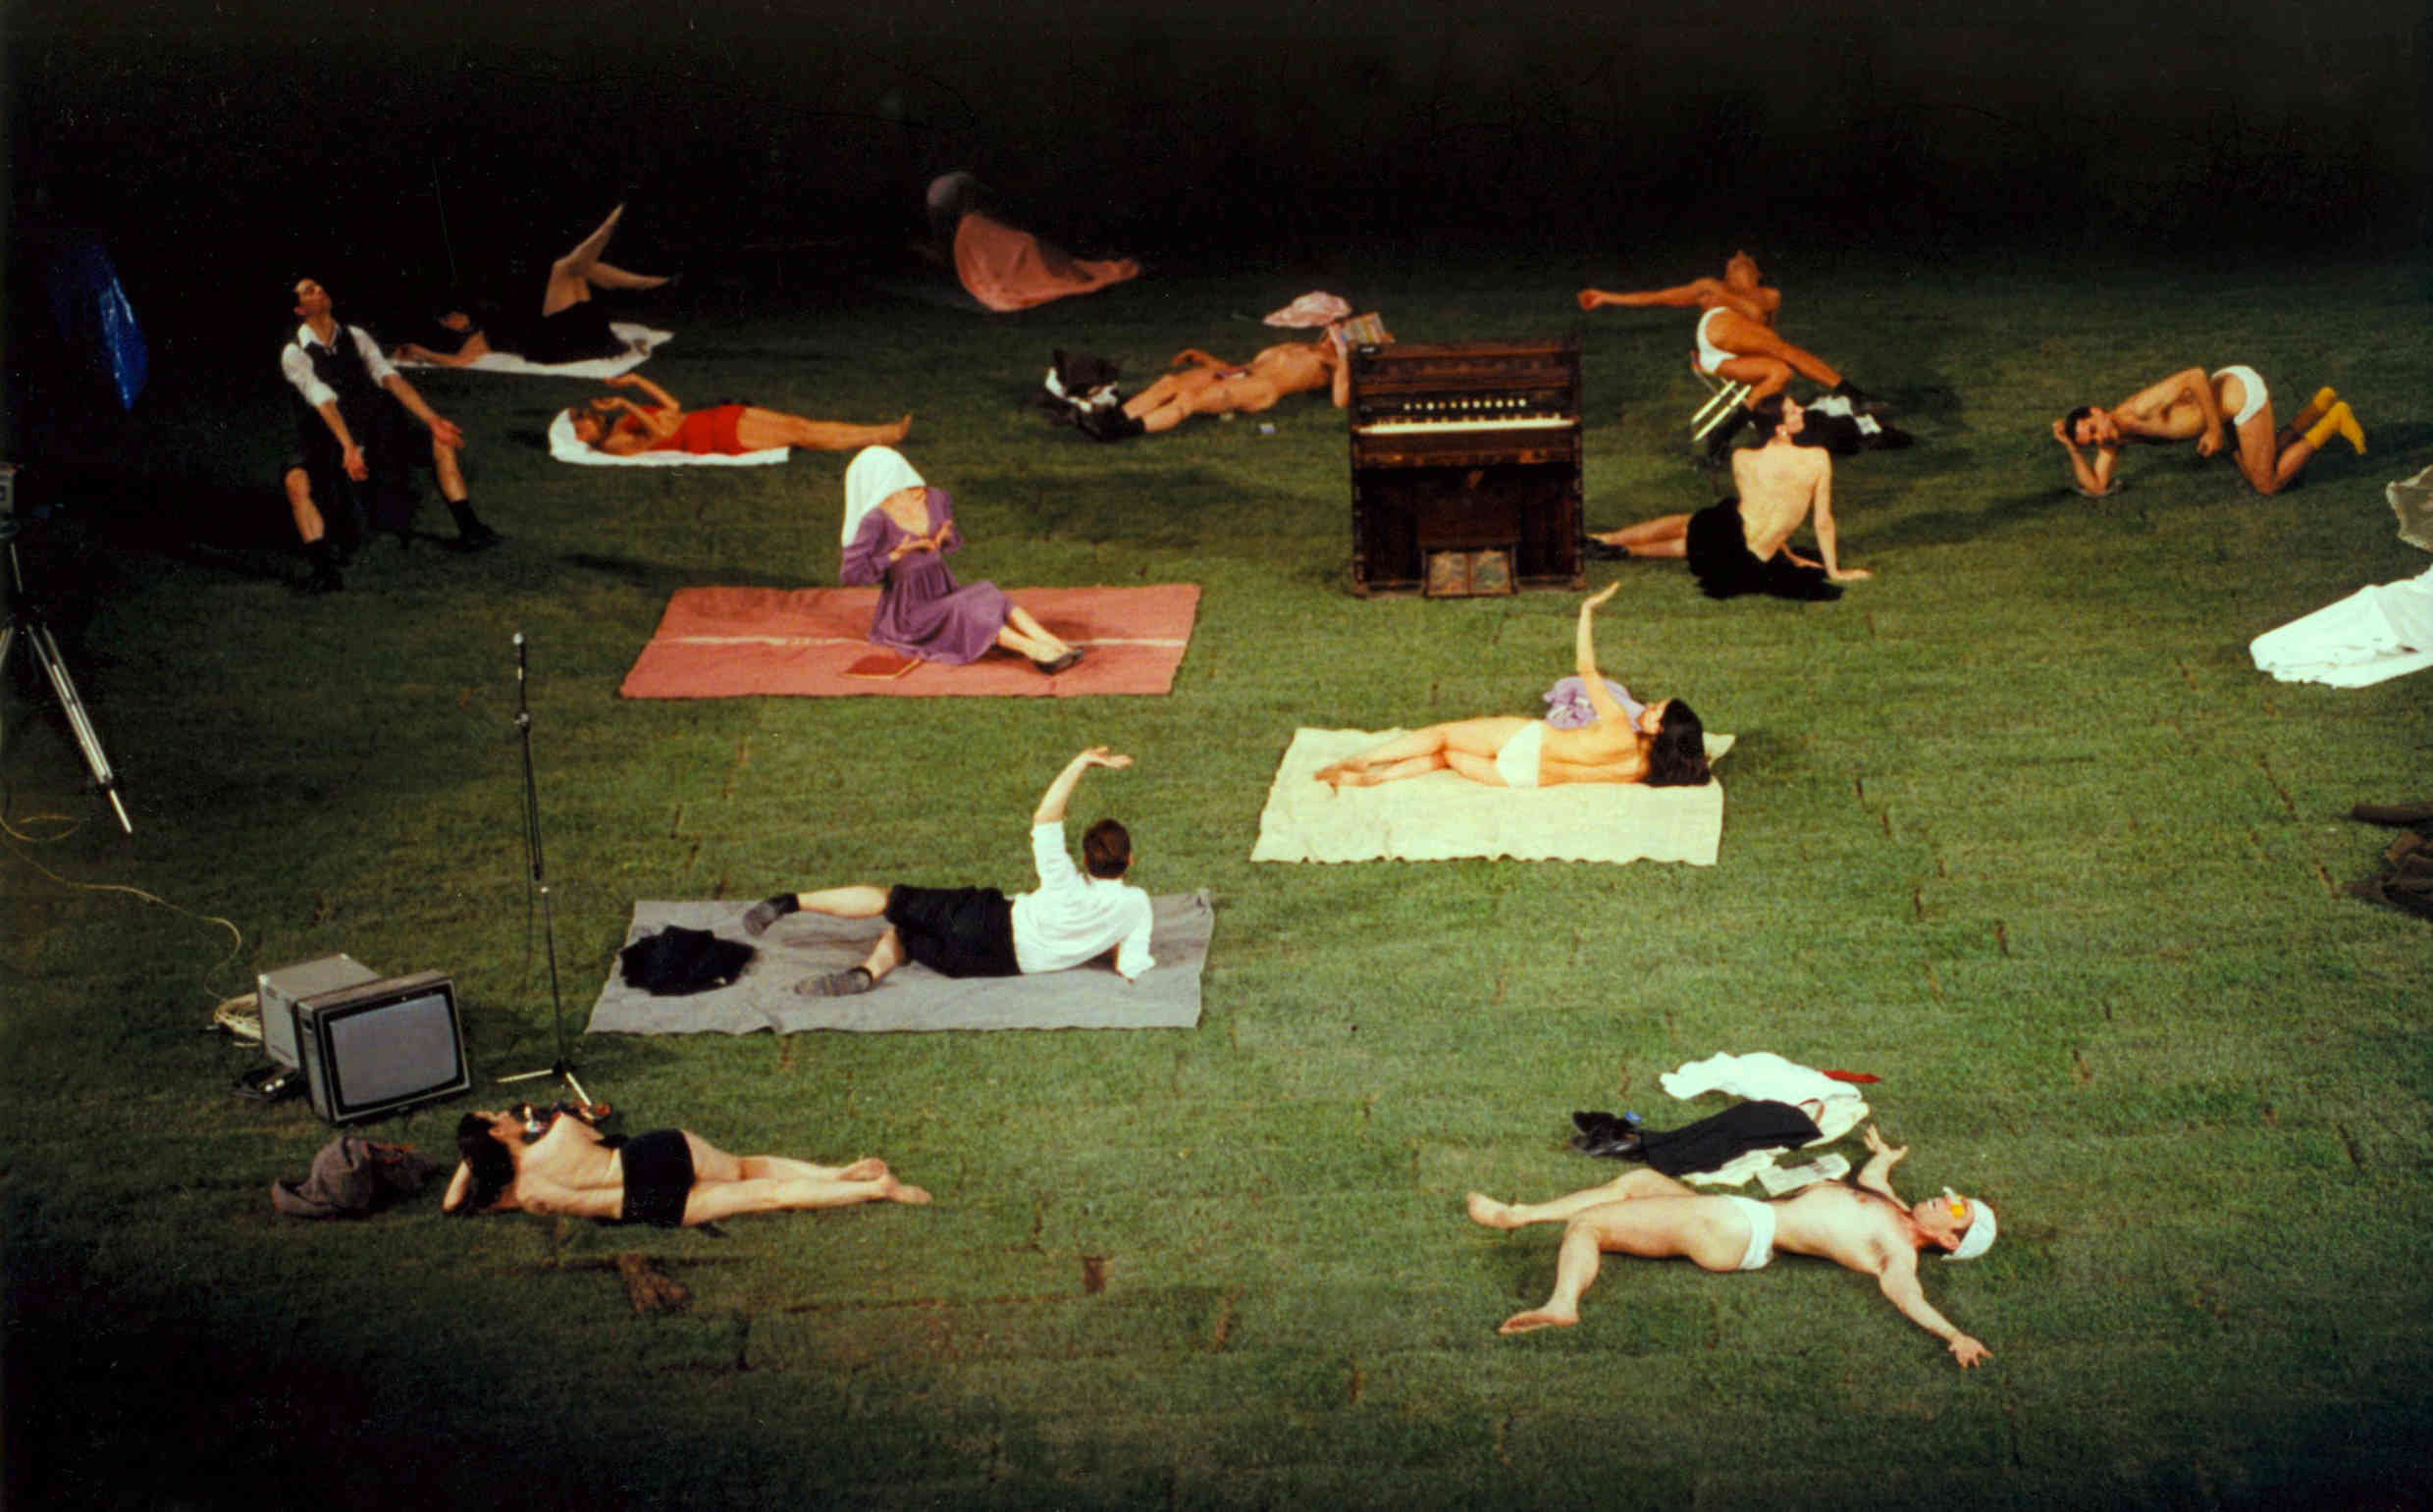 The cast of 1980 by Pina Bausch